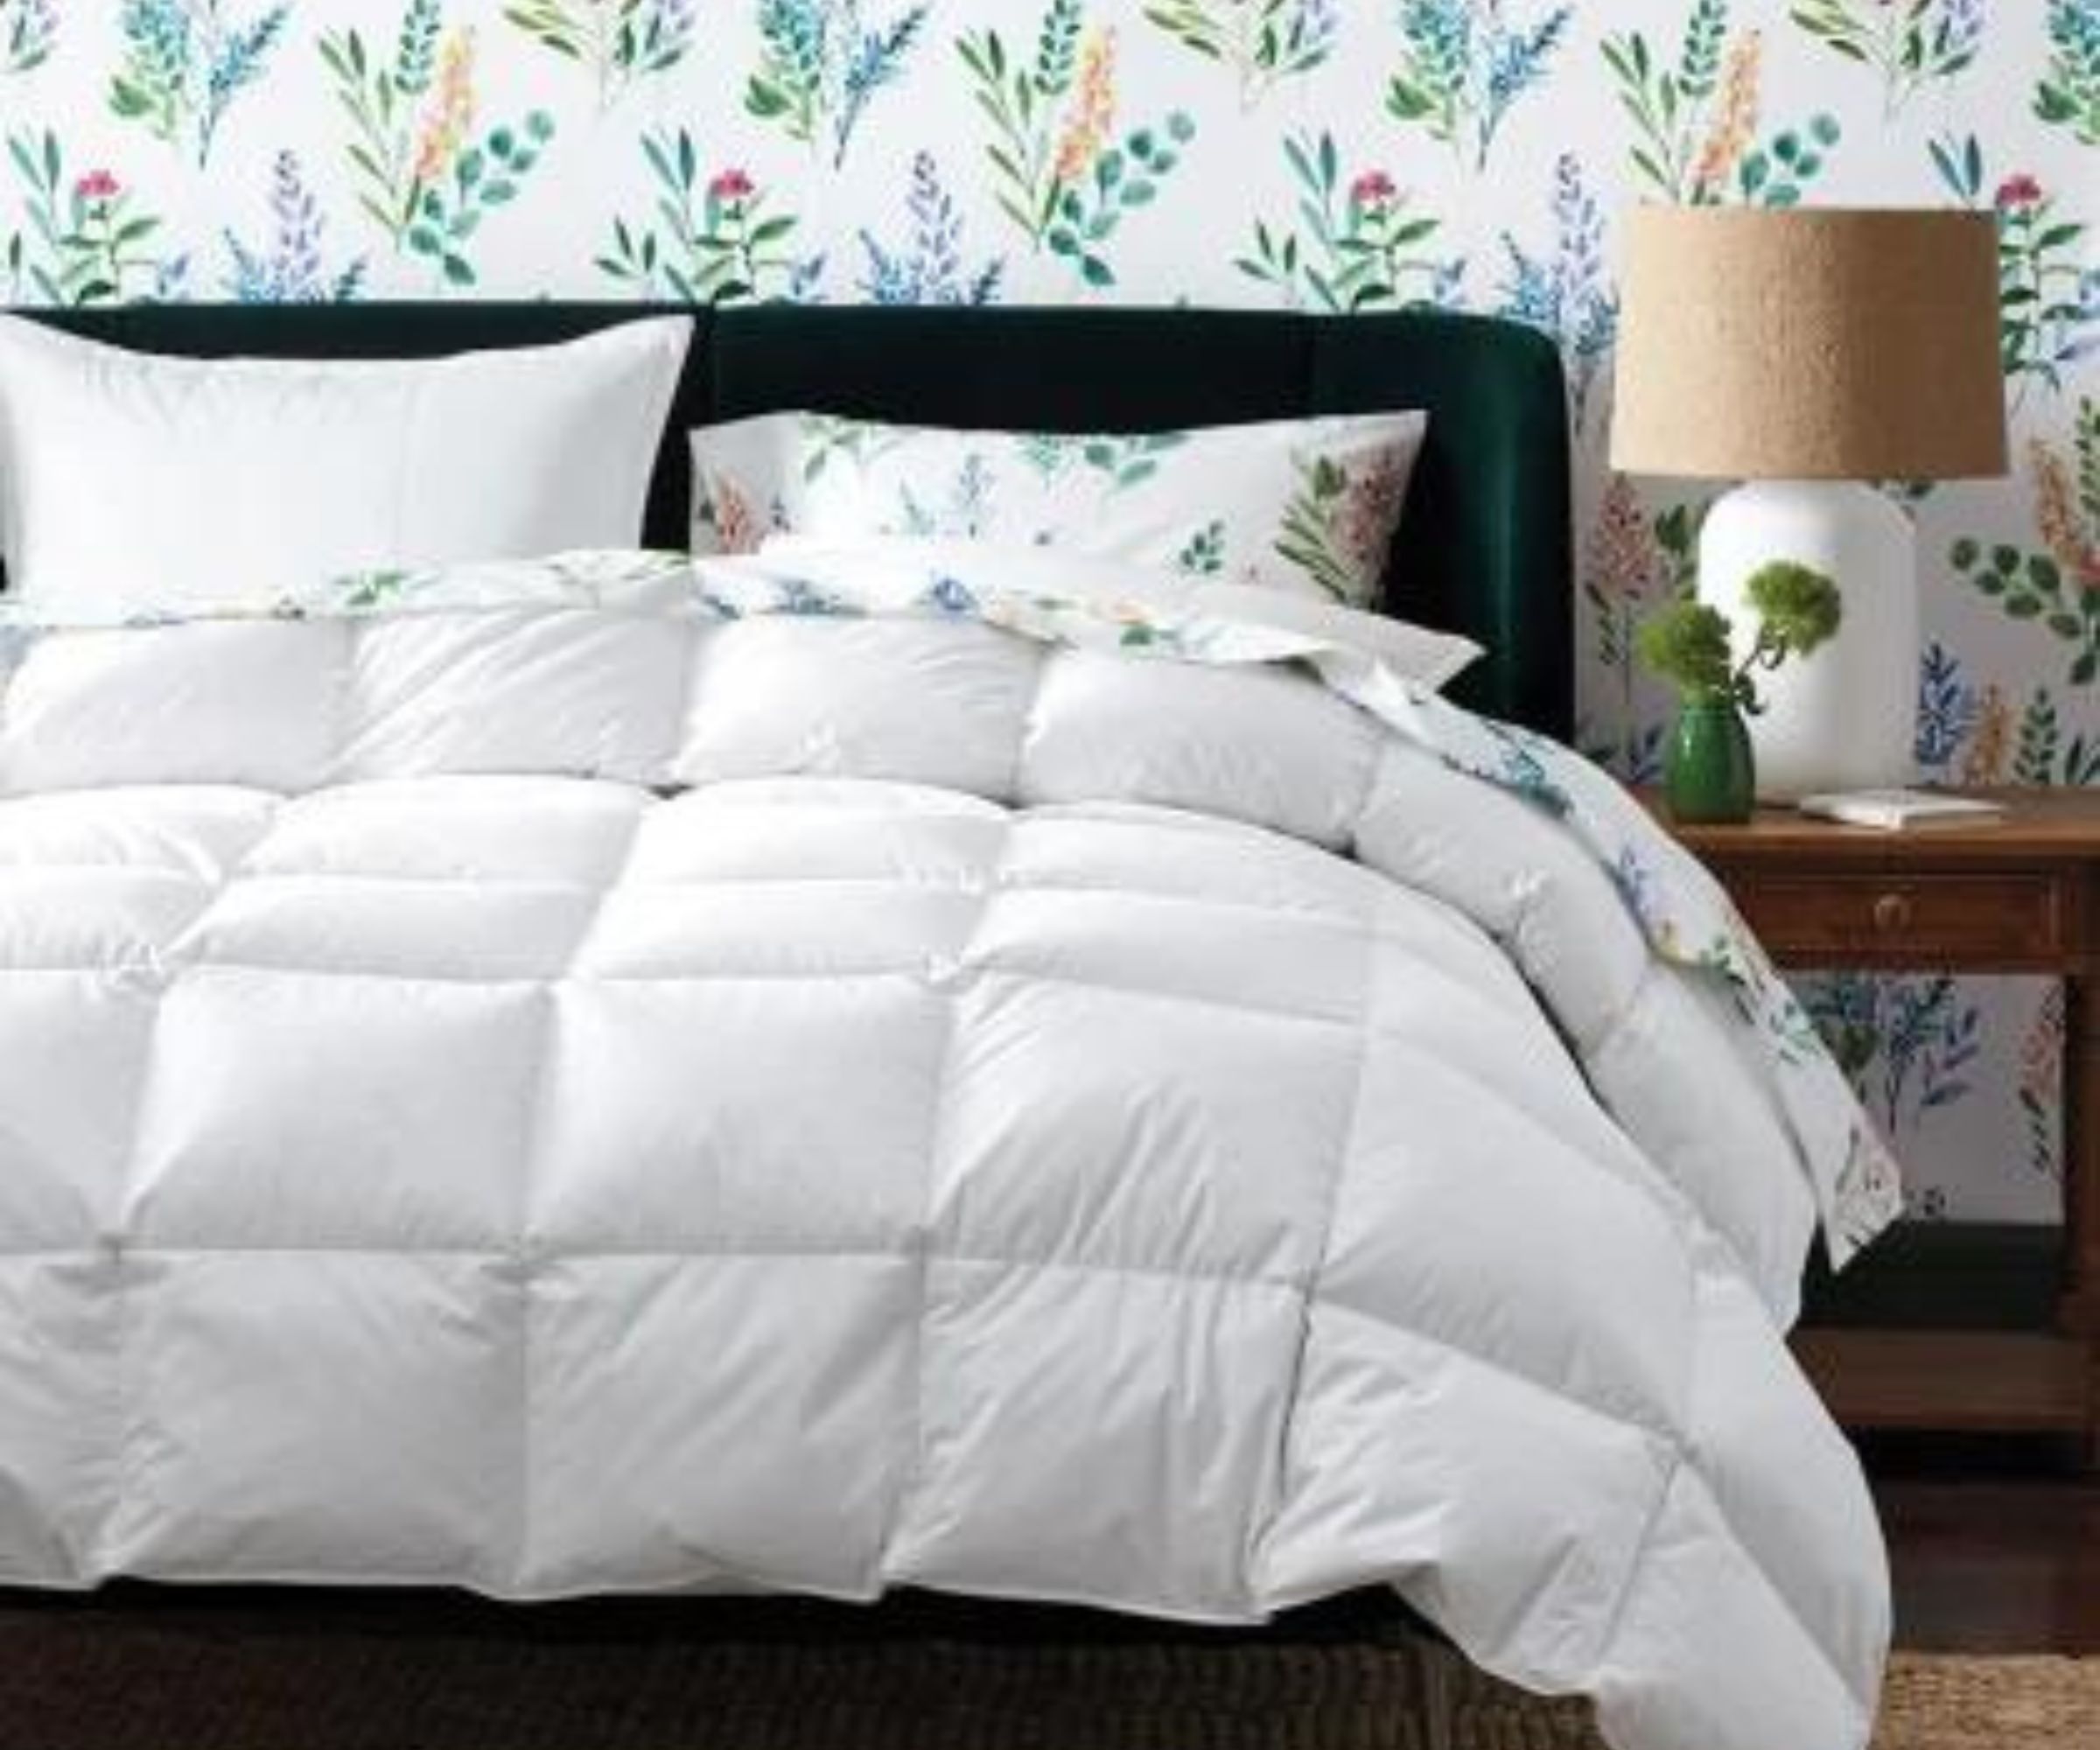 The Company Store Premium Alberta Down Comforter on a bed against floral wallpaper.